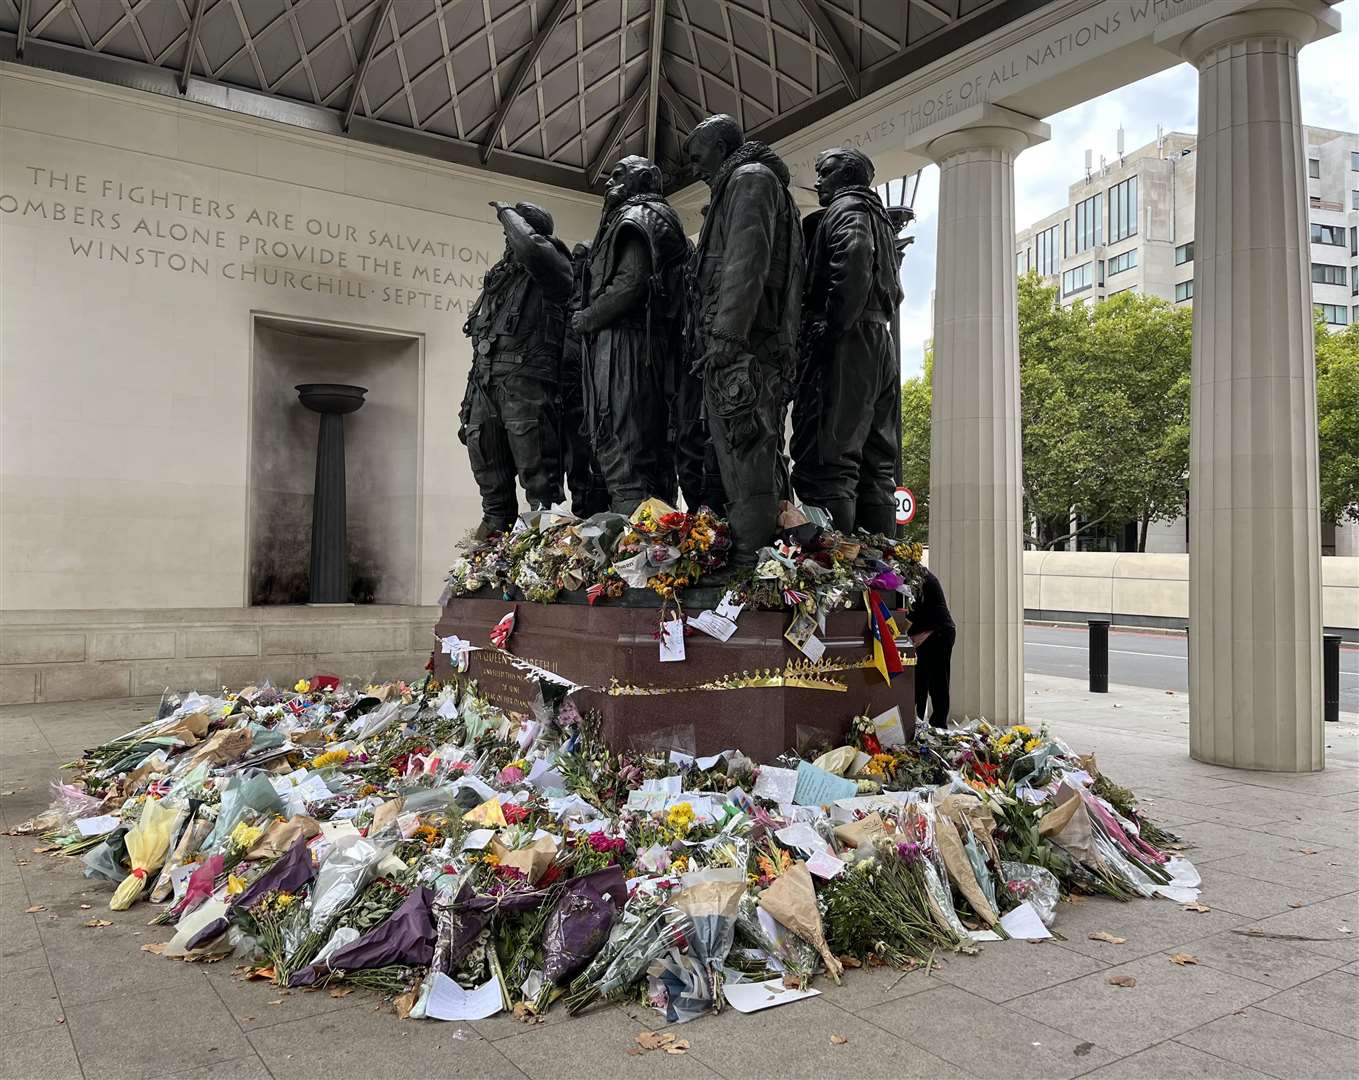 Flowers and messages have been left by the Queen's Diamond Jubilee memorial near Green Park. Picture: Chantal Weller